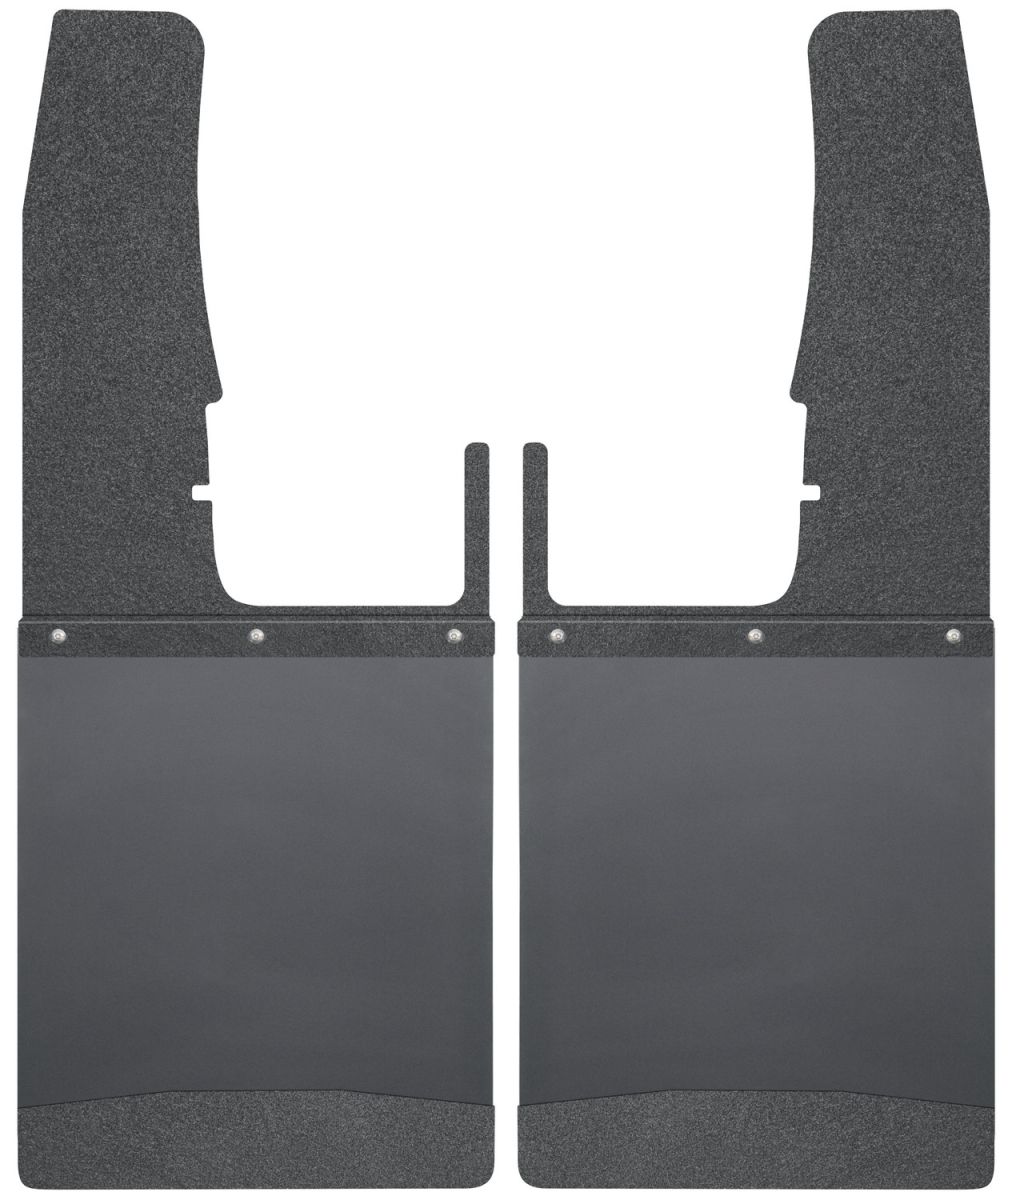 Husky Liners - Husky Liners Kick Back Mud Flaps Front 12" Wide Black Top and Black Weight 09-16 Dodge Ram 17103